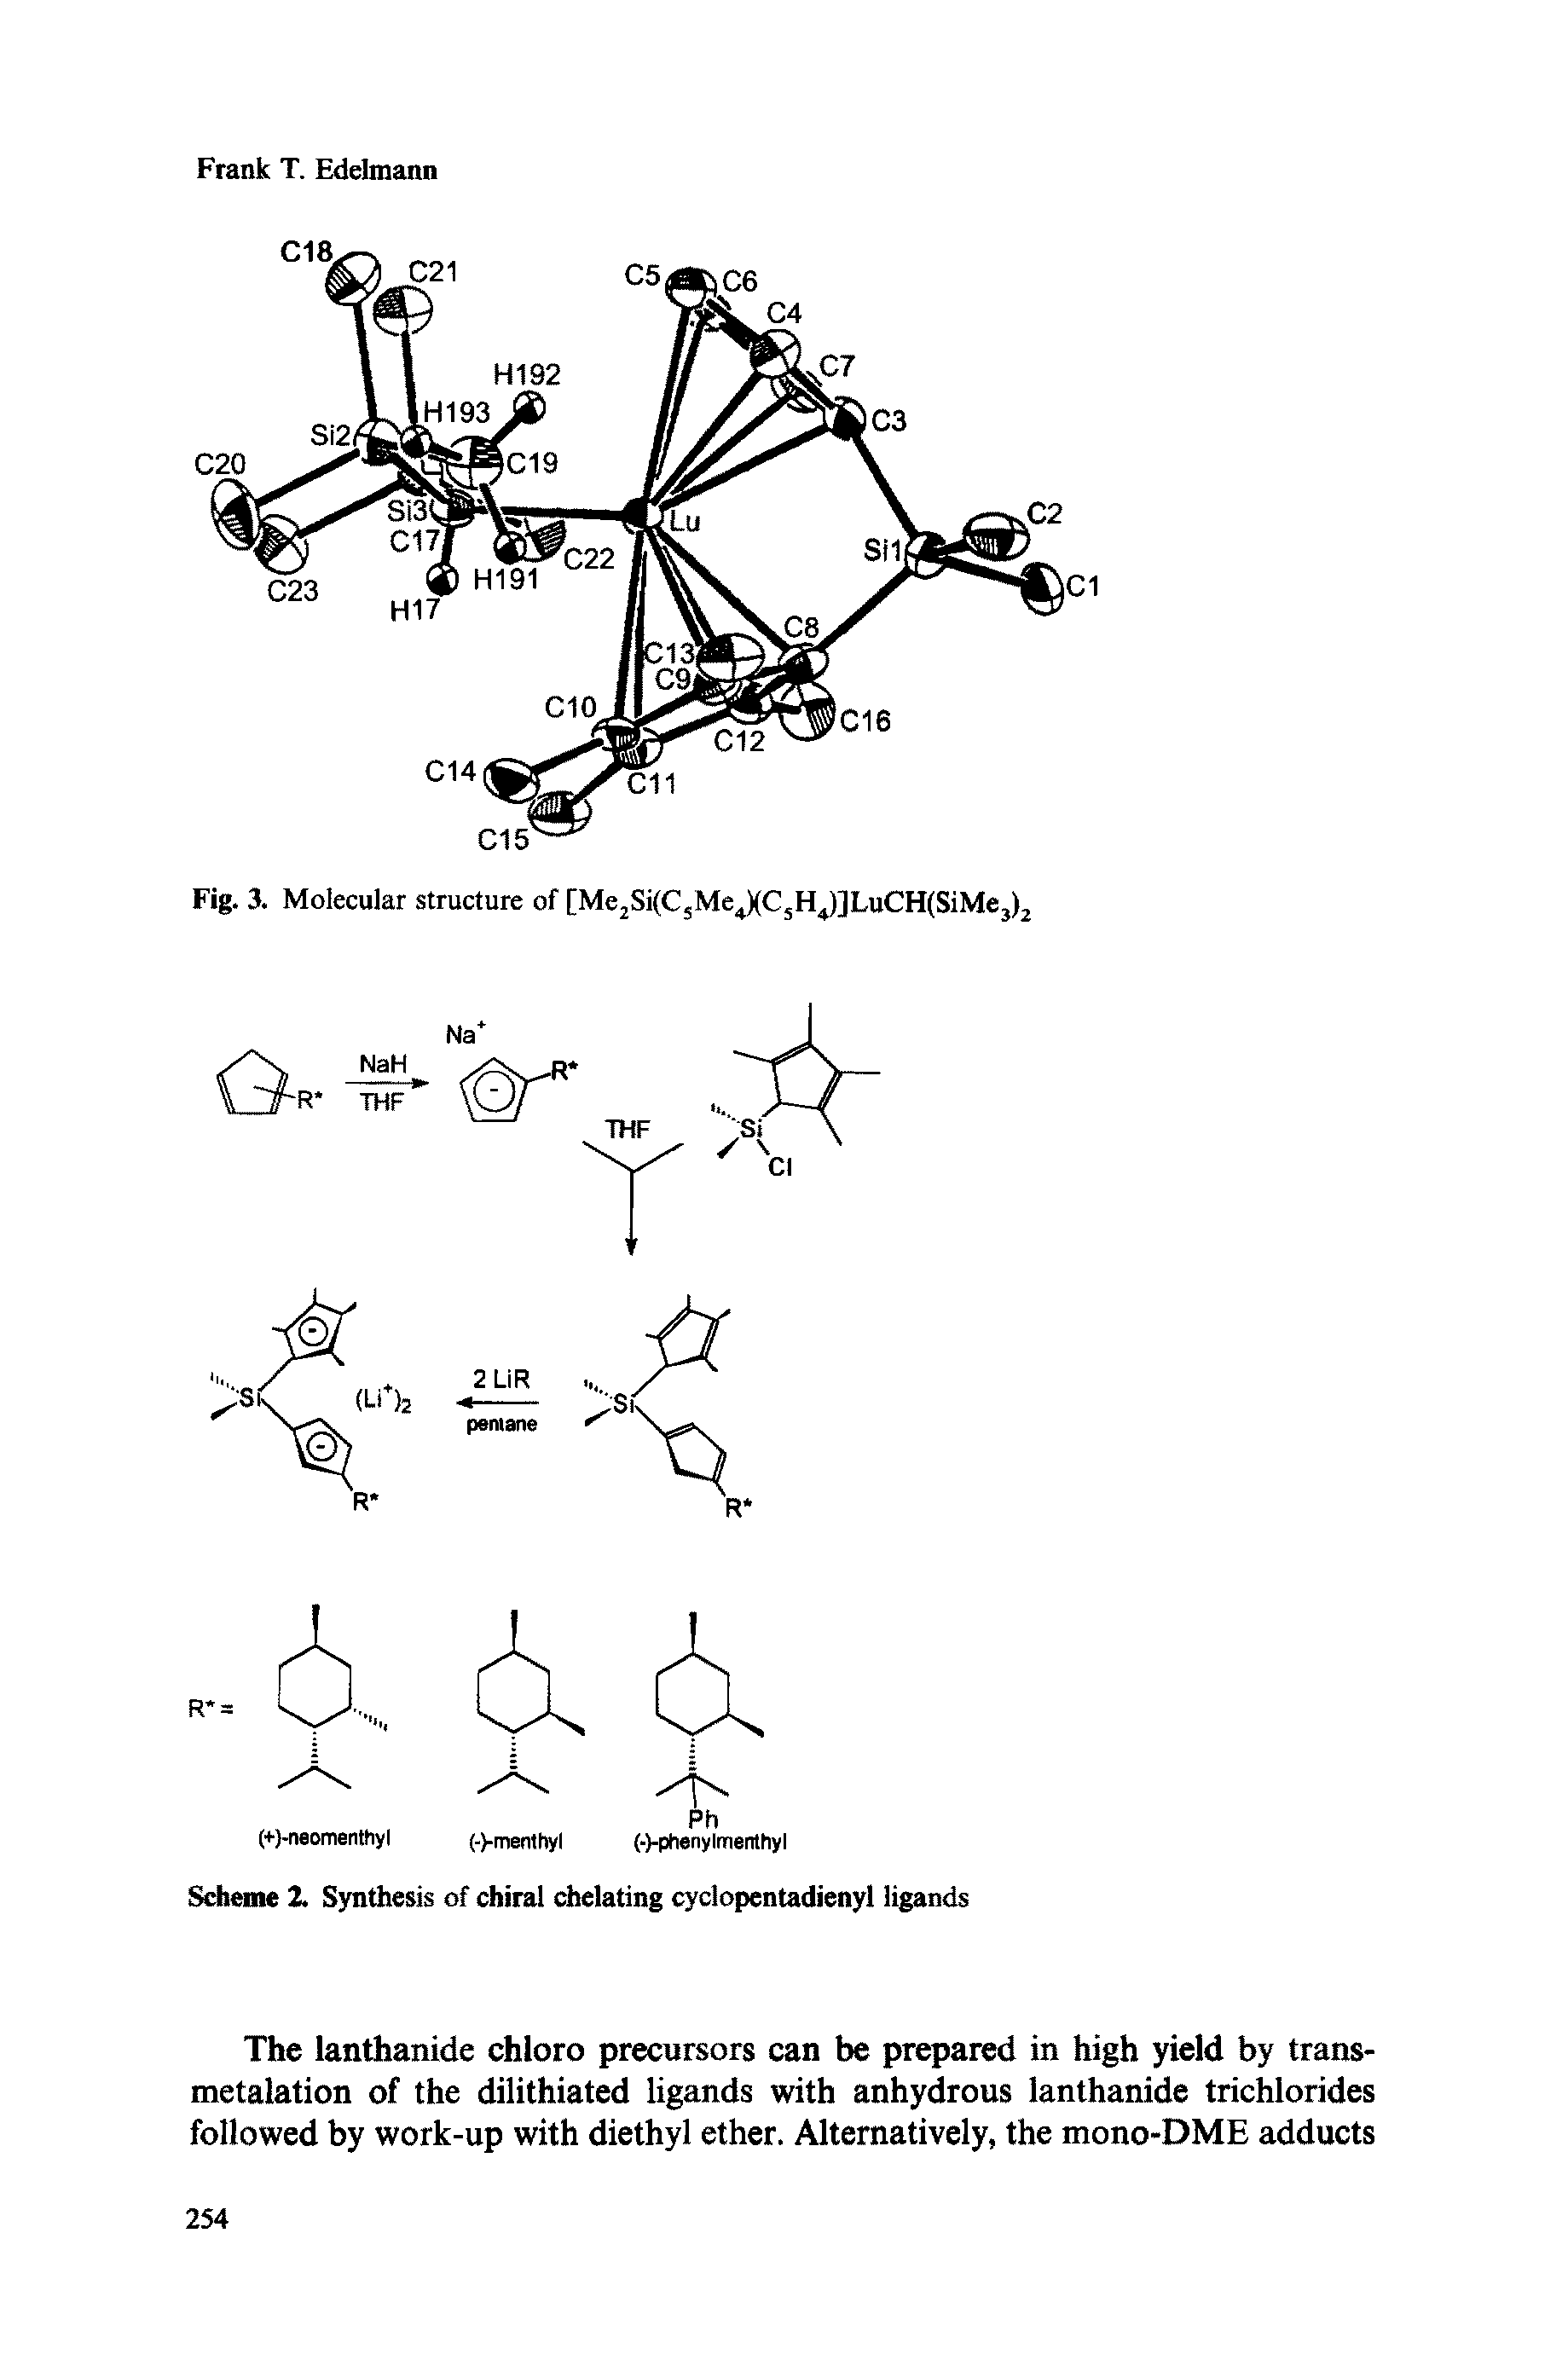 Scheme 2. Synthesis of chiral chelating cyclopentadienyl ligands...